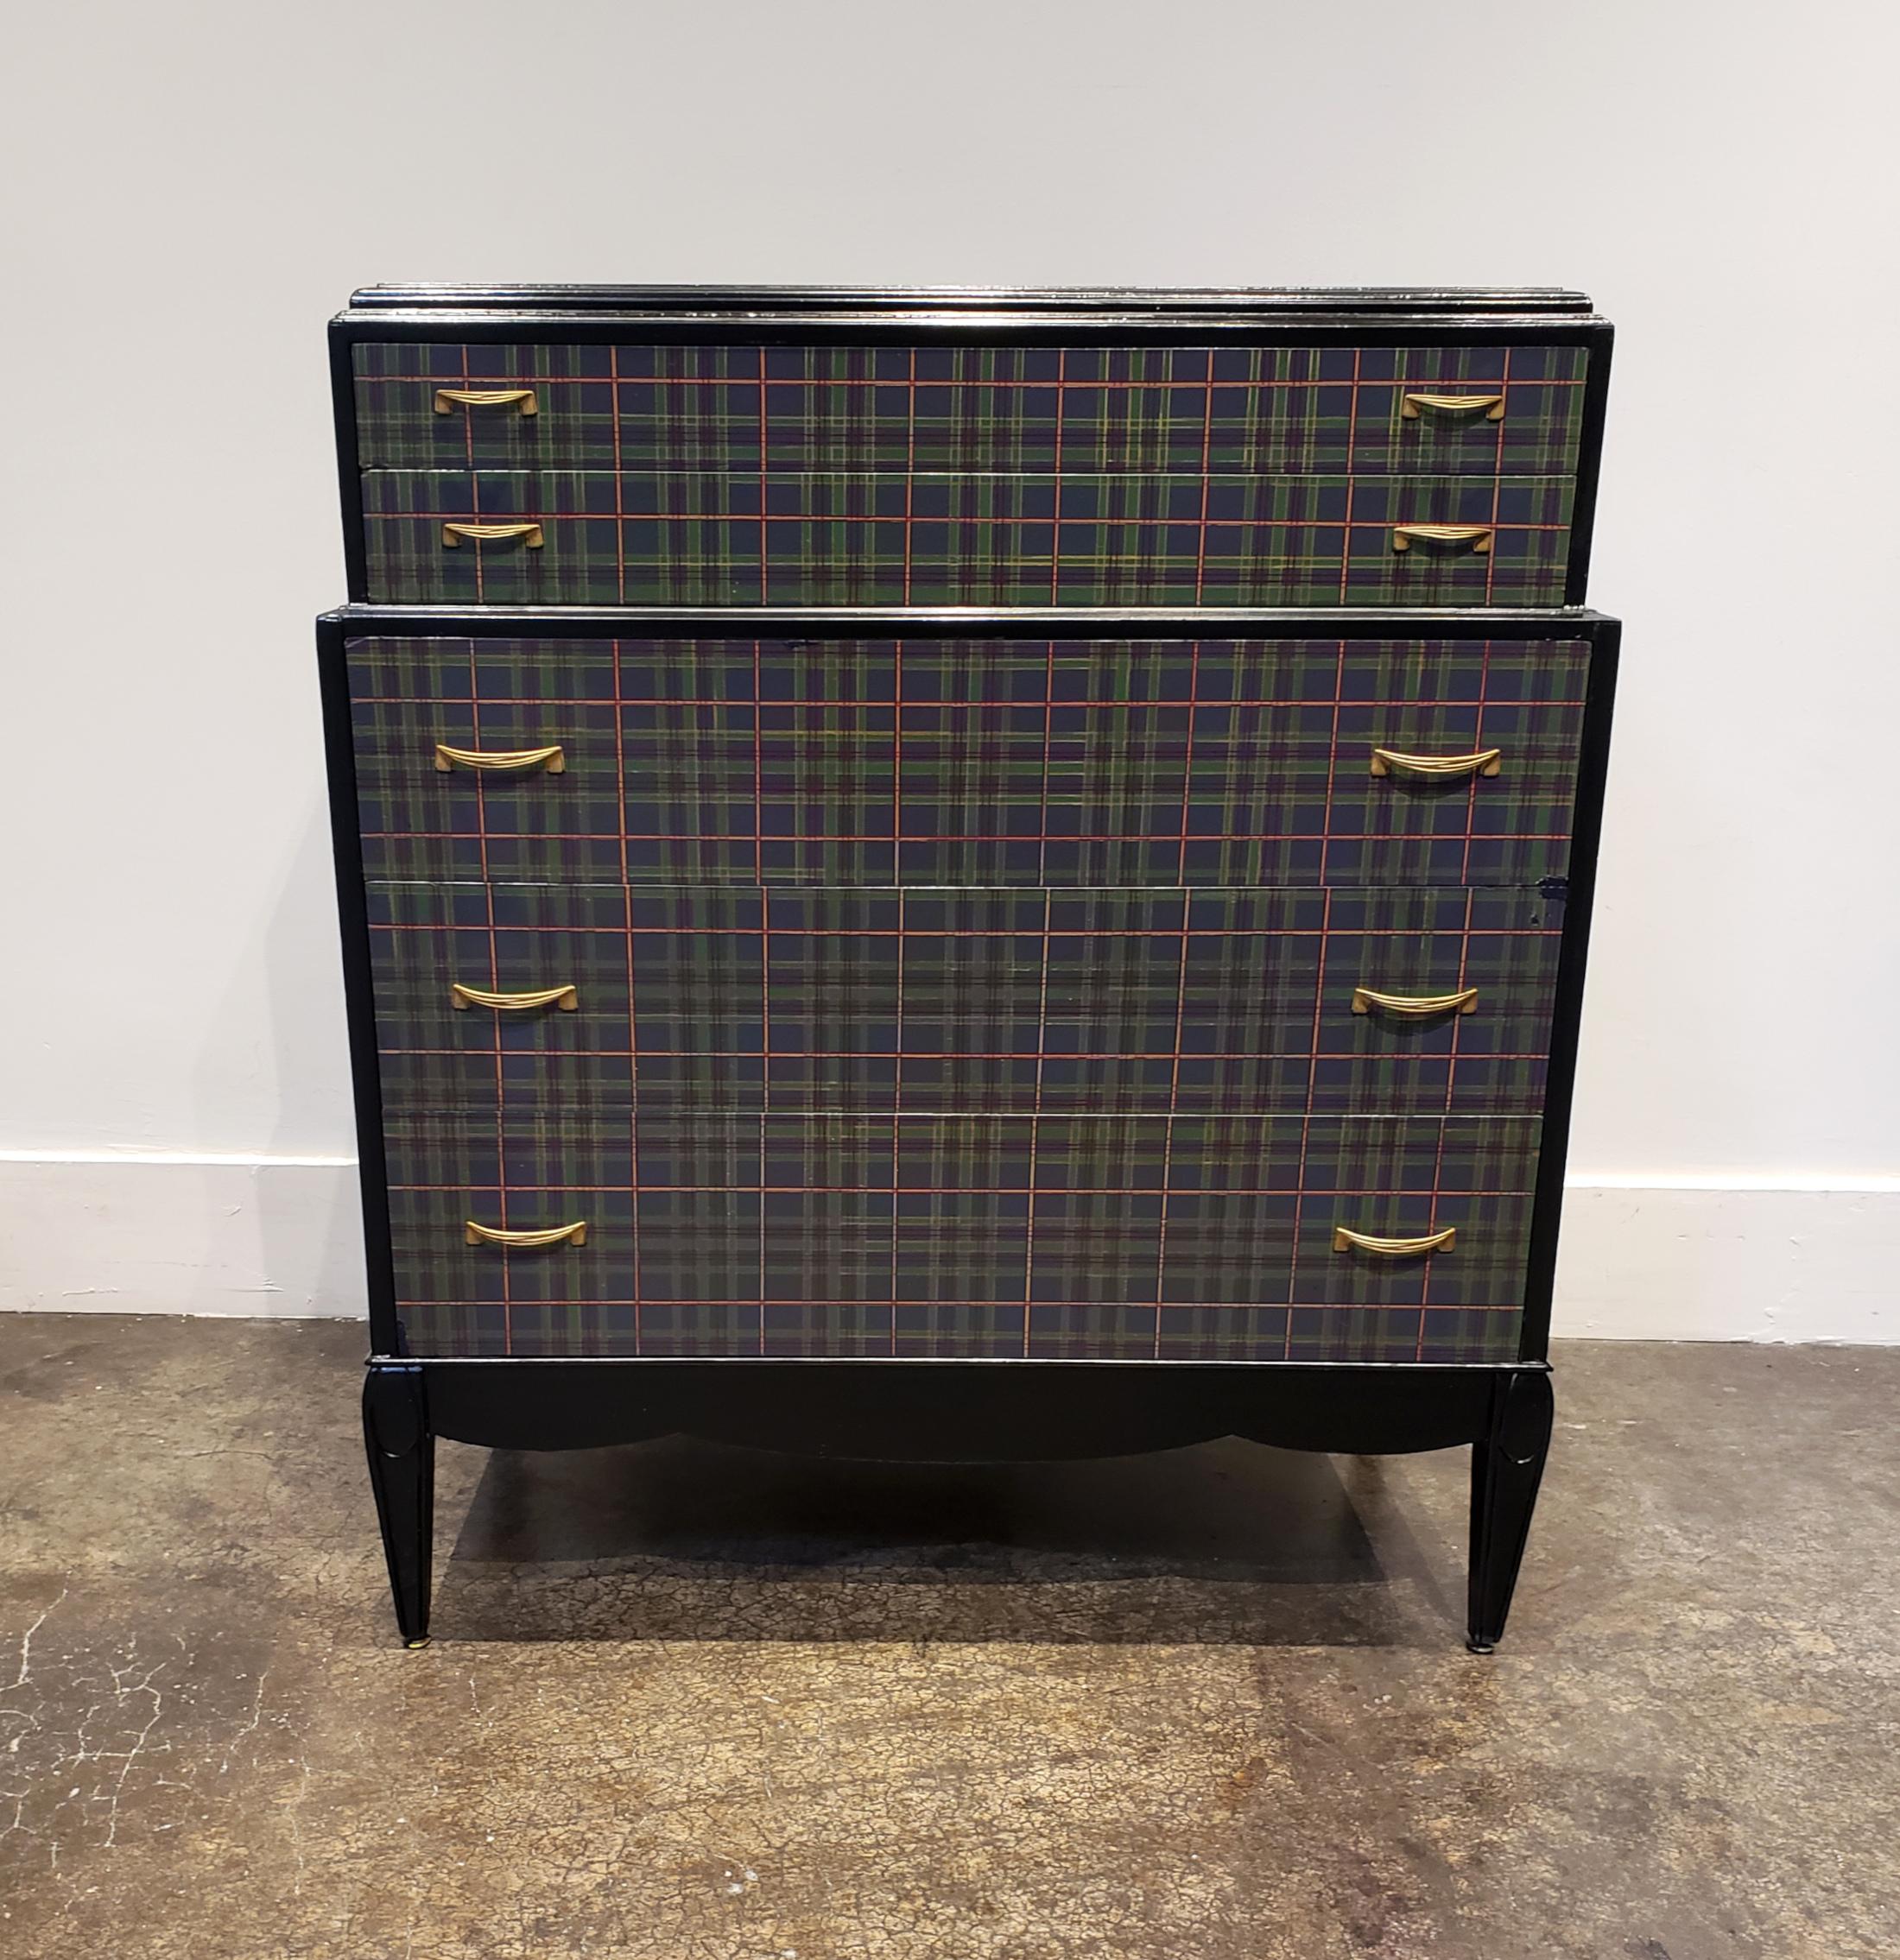 Unique shabby-chic painted chest in glossy black with hand painted tartan print on drawers. Two smaller drawers on top with three large pullout / pull-out drawers on bottom. All drawers have two ribbon style brass pulls.